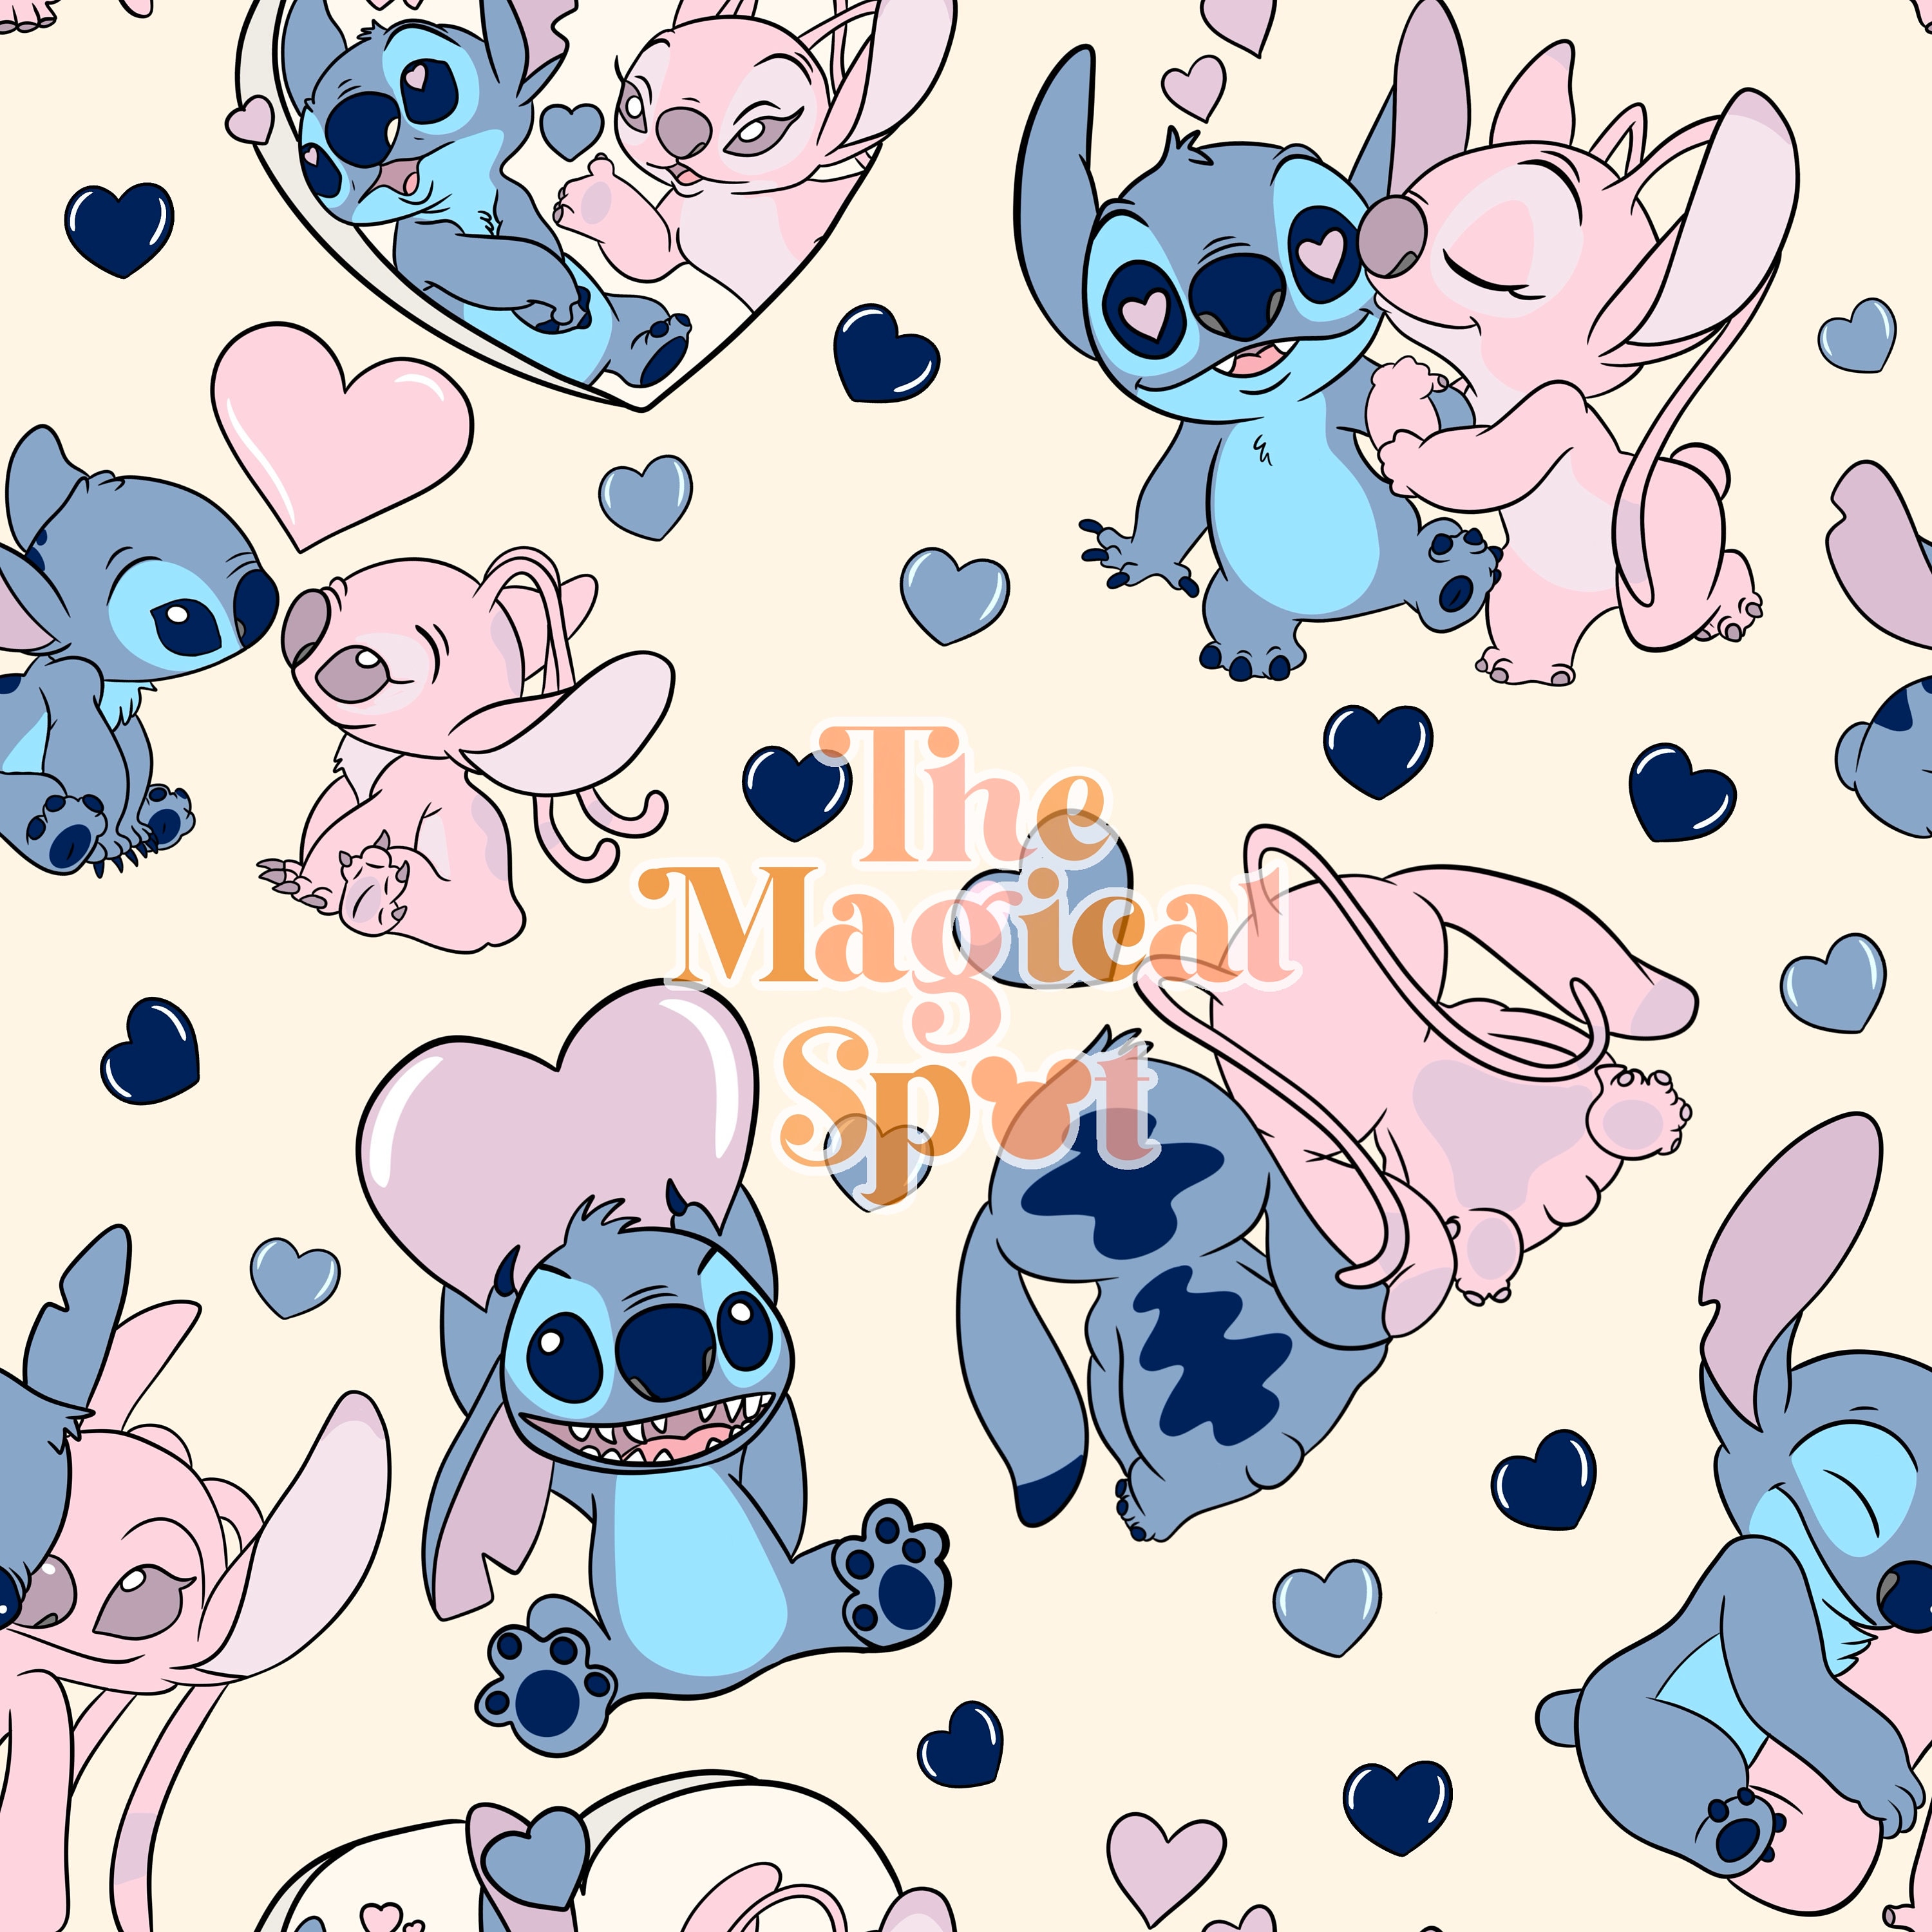 Lilo & Stitch Seamless , Digital Paper Pack, Scrapbook Paper Wrapping  Paper, Giggleboxdesignshop, Backgrounds, Digital Patterns, 12x12 Paper 